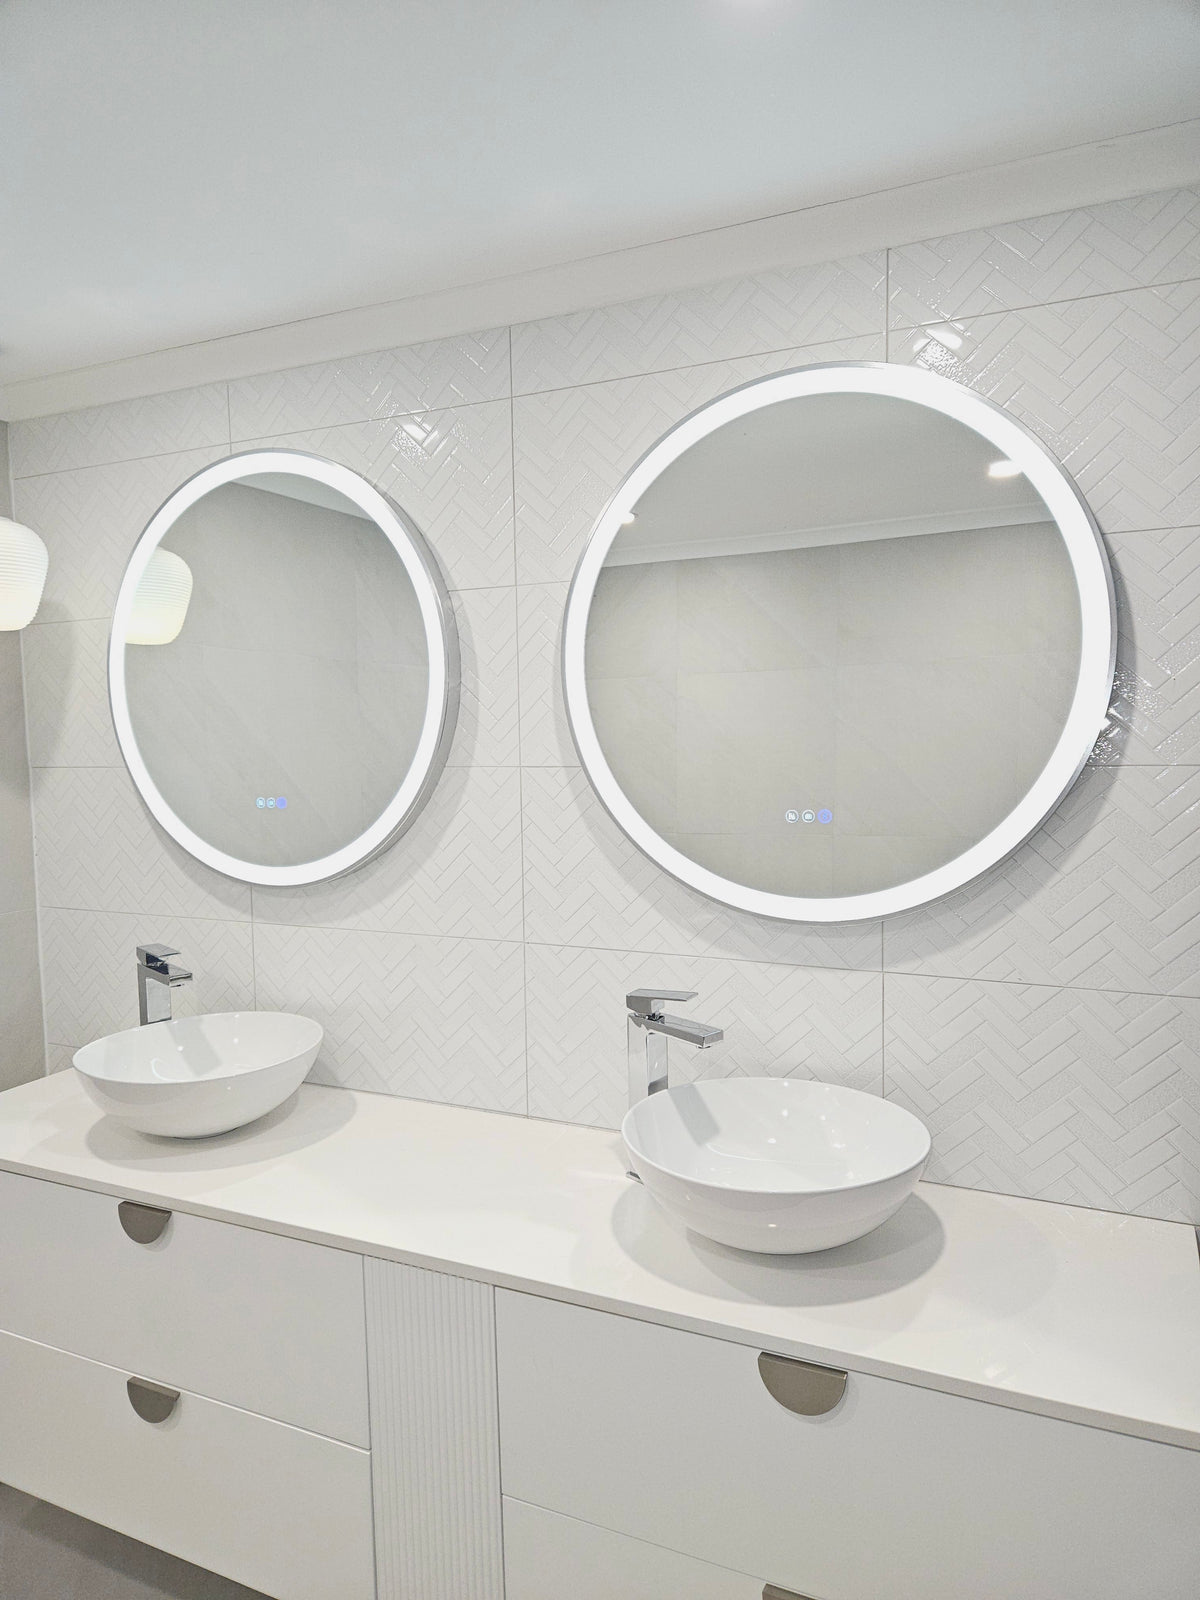 InVogue Mirrors' Silver Frame Circle Smart LED Mirrors Adding Style to All-White Bathroom